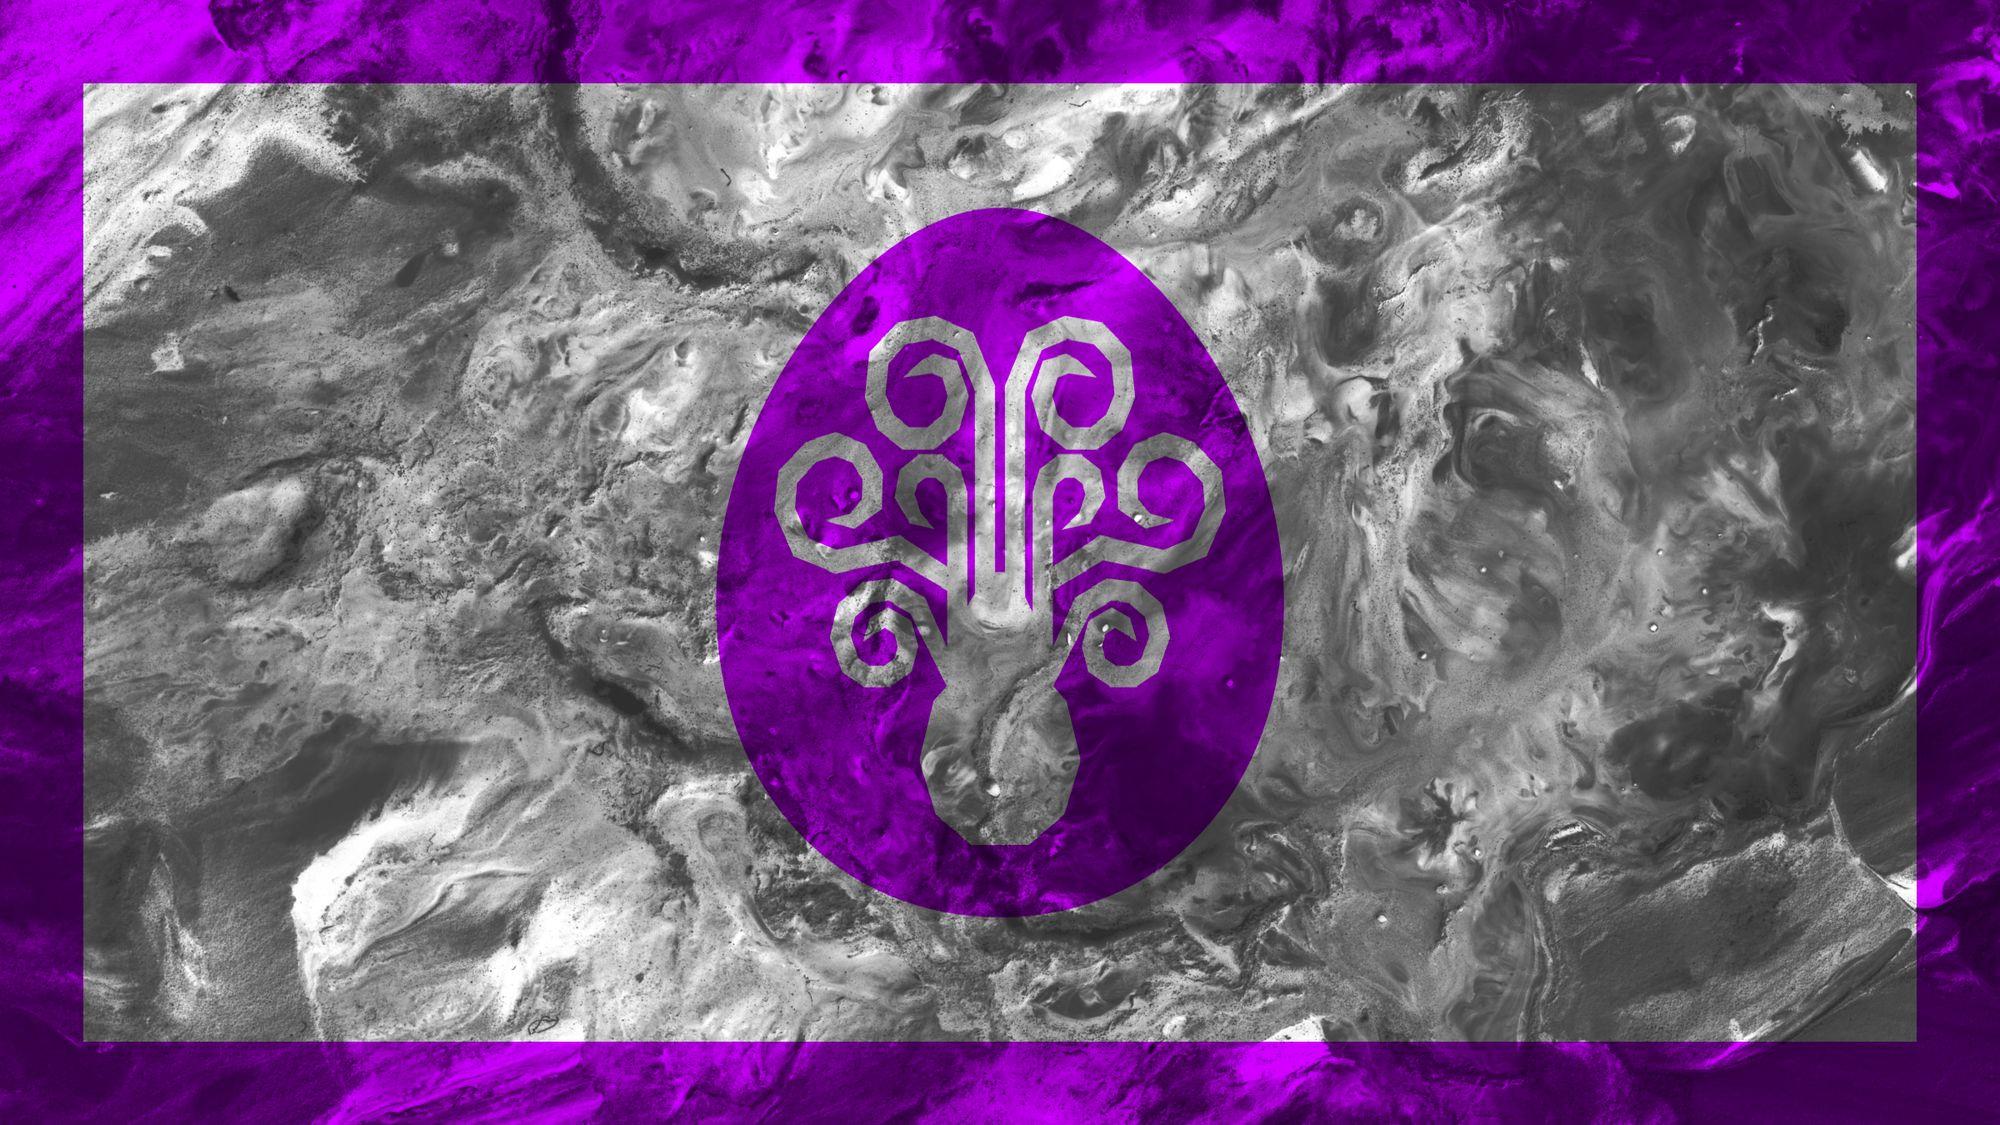 The symbolism of the egg, the octopus, and the color purple.